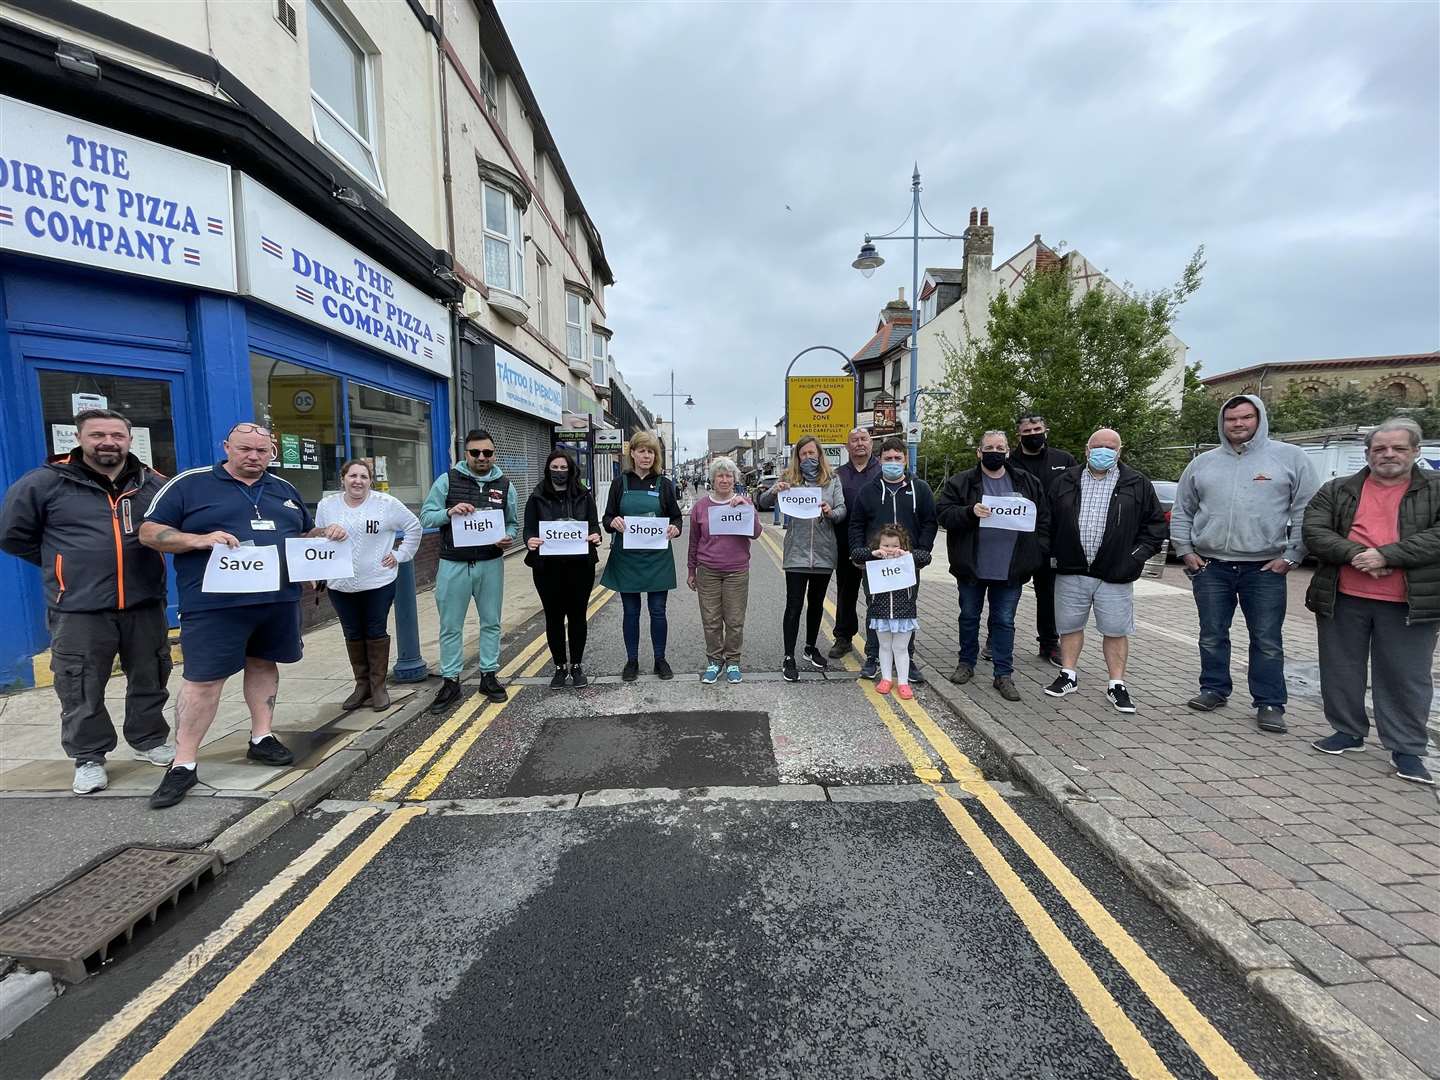 Fed-up shopkeepers staged a peaceful protest in Sheerness High Street against the town's pedestrianisation scheme